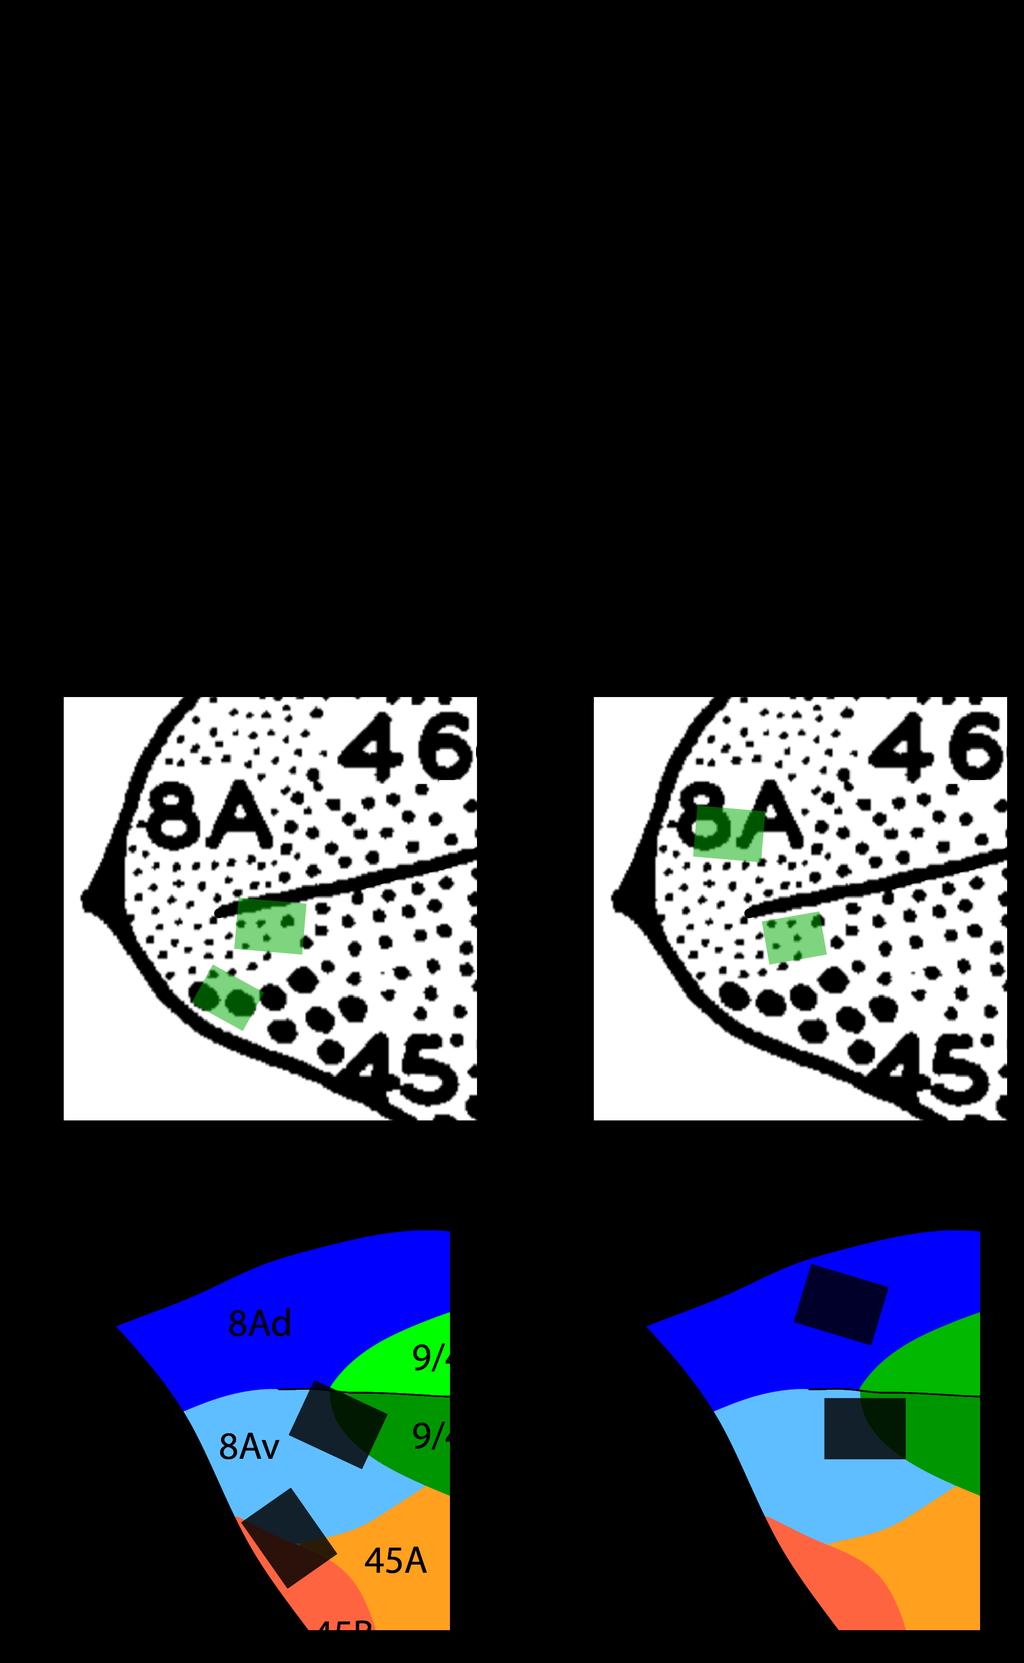 Figure S2. Anatomical locations of microelectrode arrays. Related to STAR Methods. (A) Microelectrode arrays placement relative to frontal sulci.